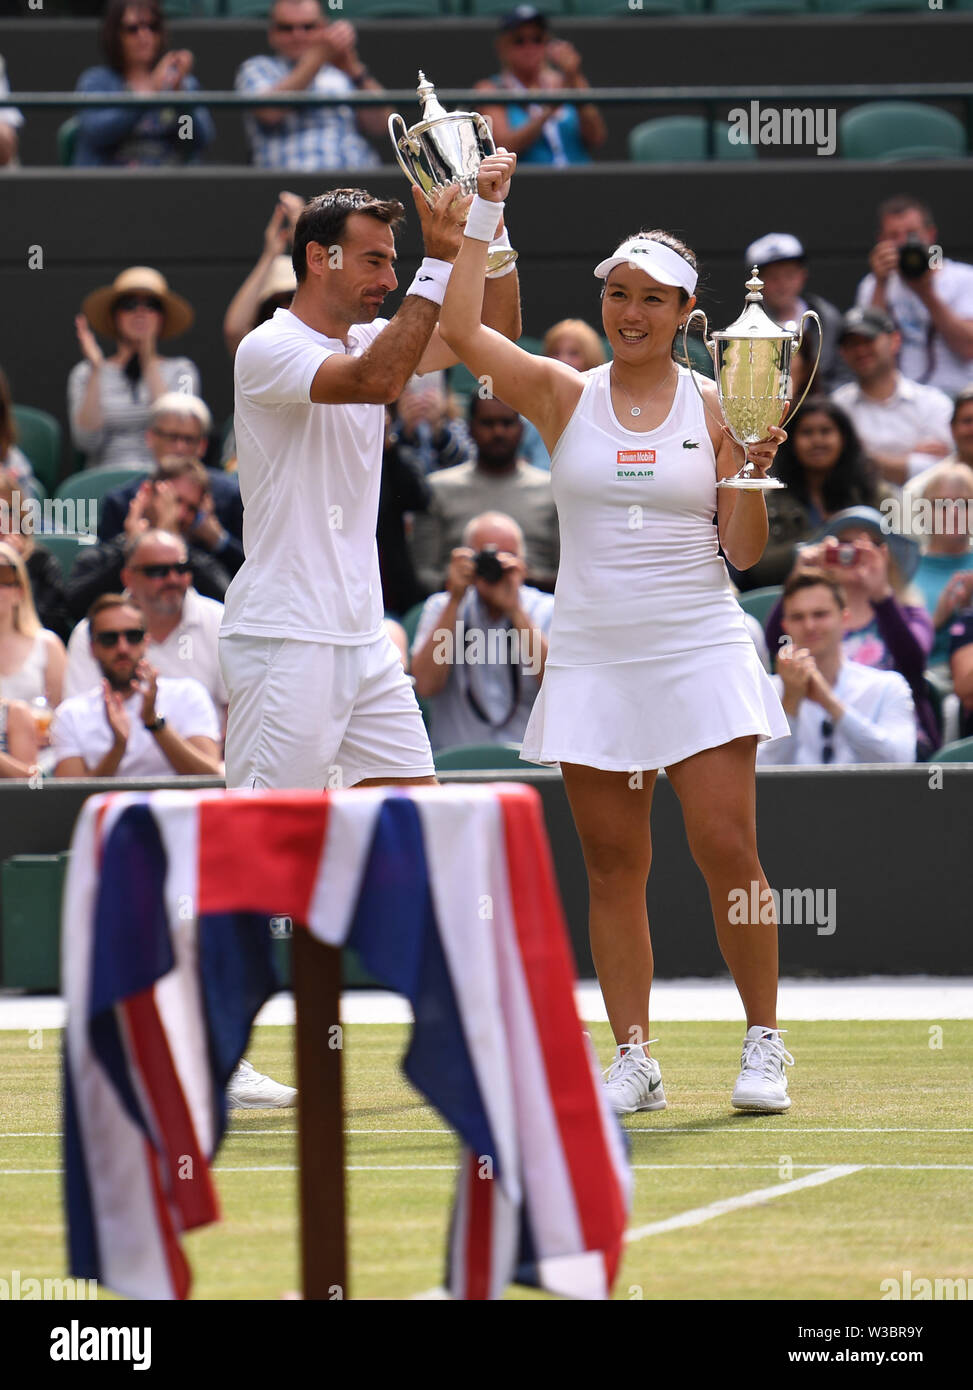 London, UK. 14th July, 2019. Ivan Dodig (L) of Croatia and Latisha Chan of  Chinese Taipei lift up their trophies after winning the mixed doubles final  match against Robert Lindstedt of Sweden